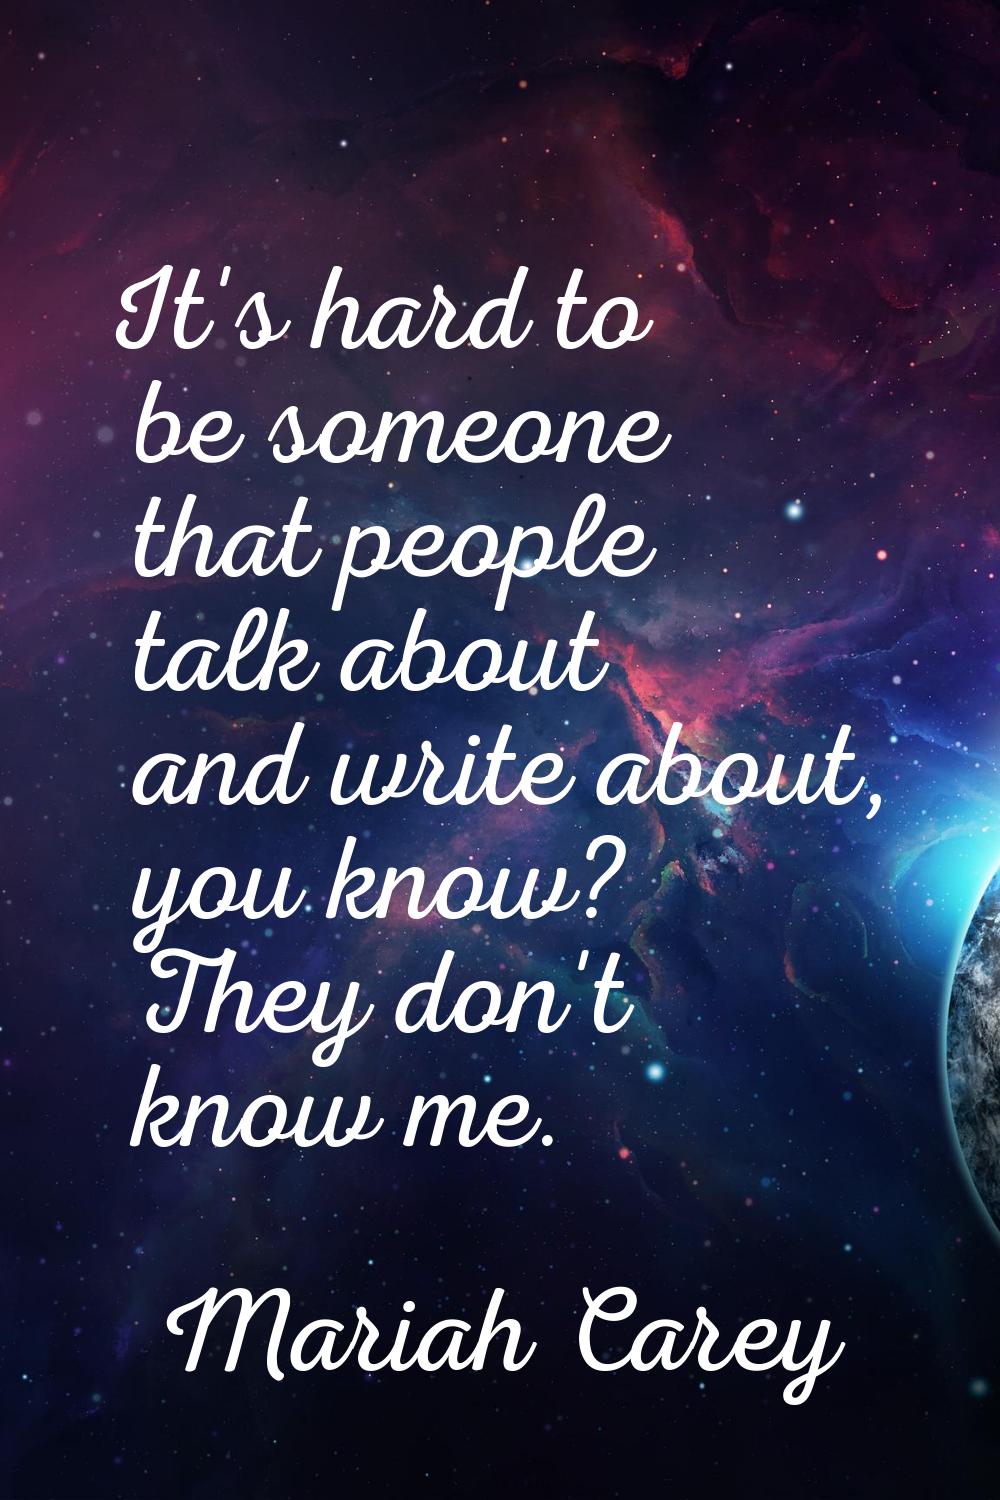 It's hard to be someone that people talk about and write about, you know? They don't know me.